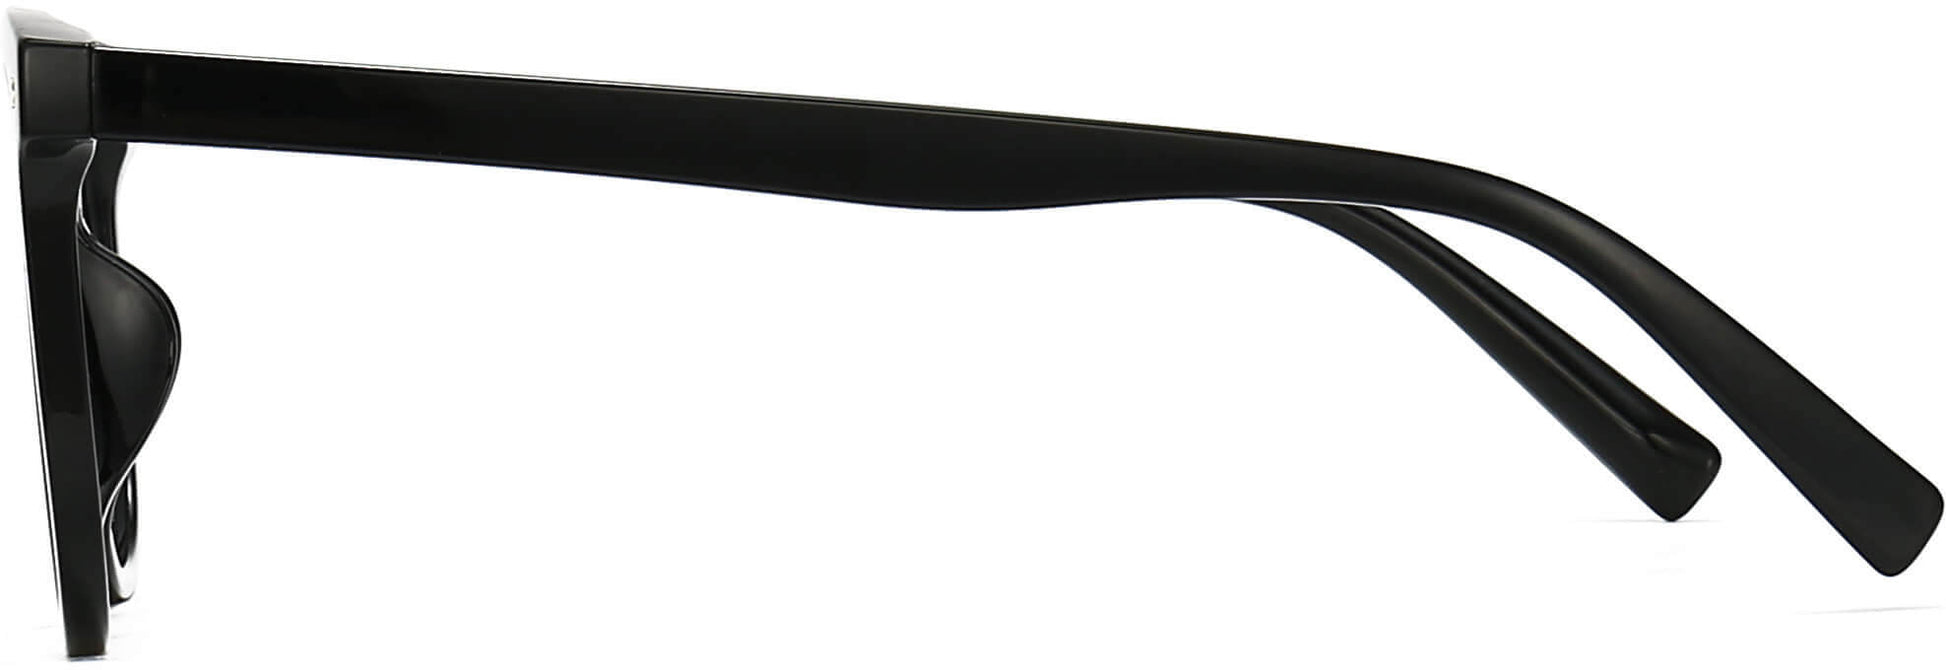 Catalina Square Black Eyeglasses from ANRRI, side view